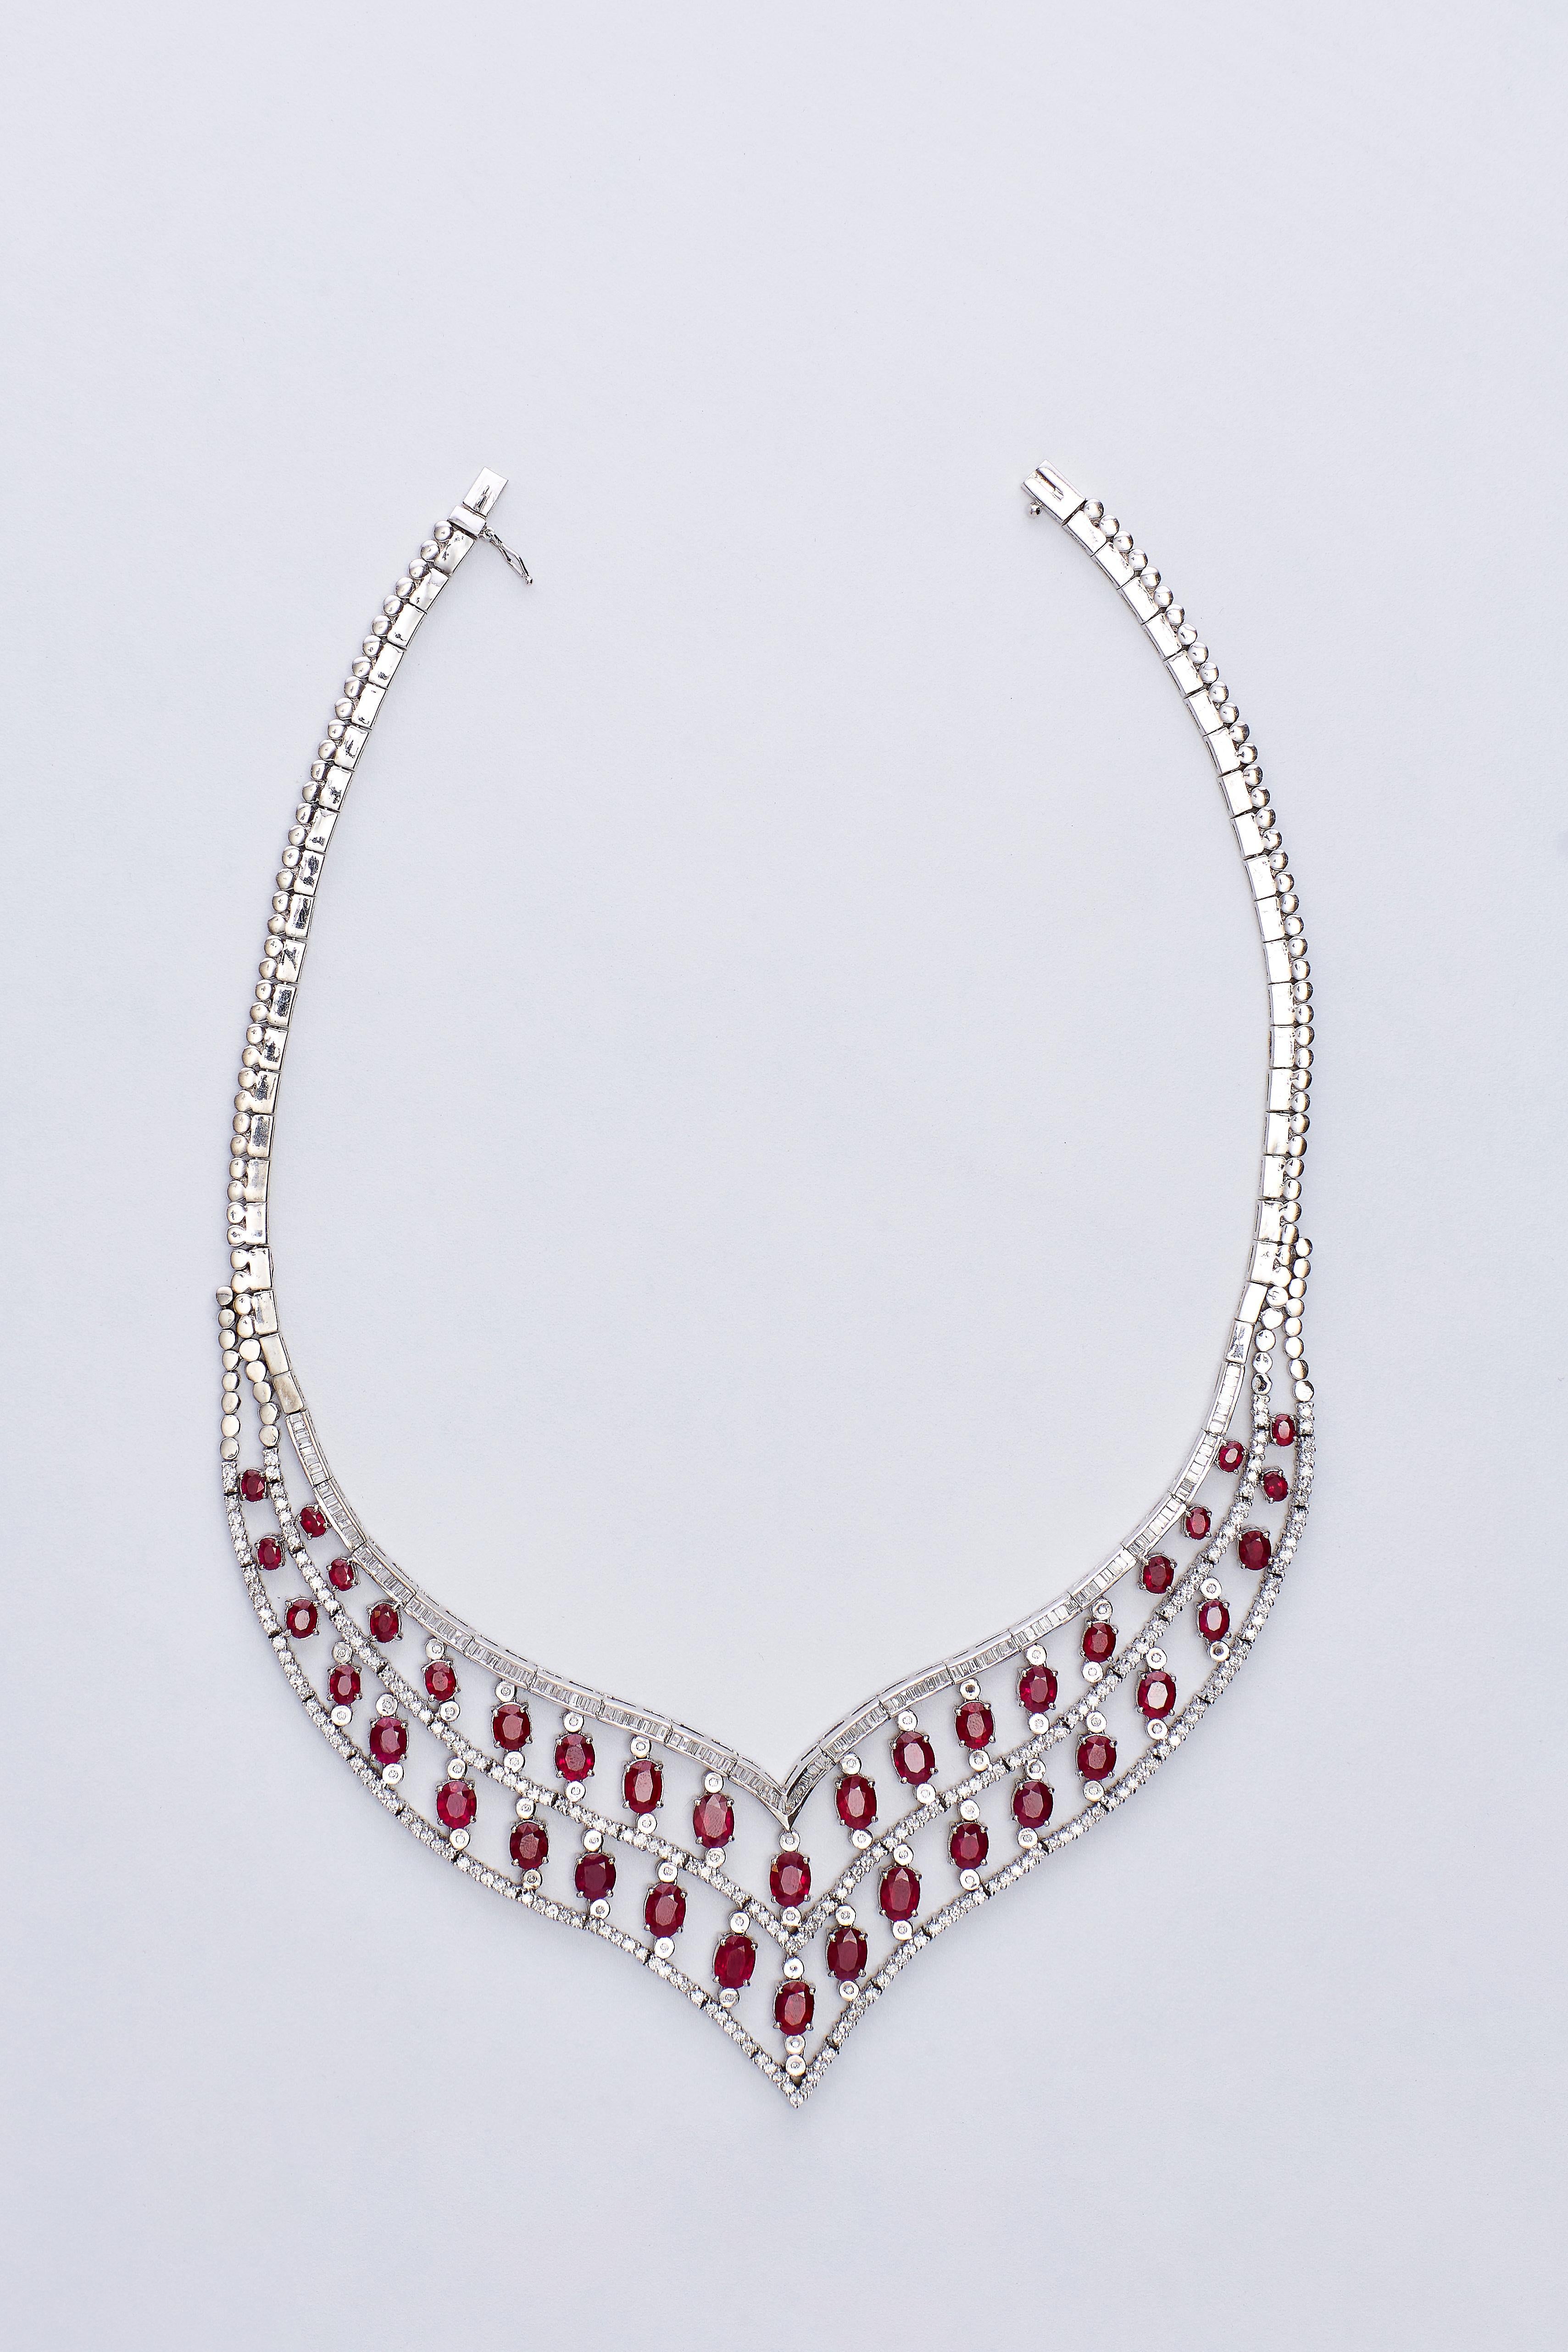 Elegant 18 Karat White Gold Diamonds and Rubies Necklace 
Stunning Natural Ruby and Diamonds collier, beautiful design of 18K white gold.
Ruby Burma approx. 26.5 ct and Diamonds approx. 10.5 ct F VS1.
Total weight: 89 grams.